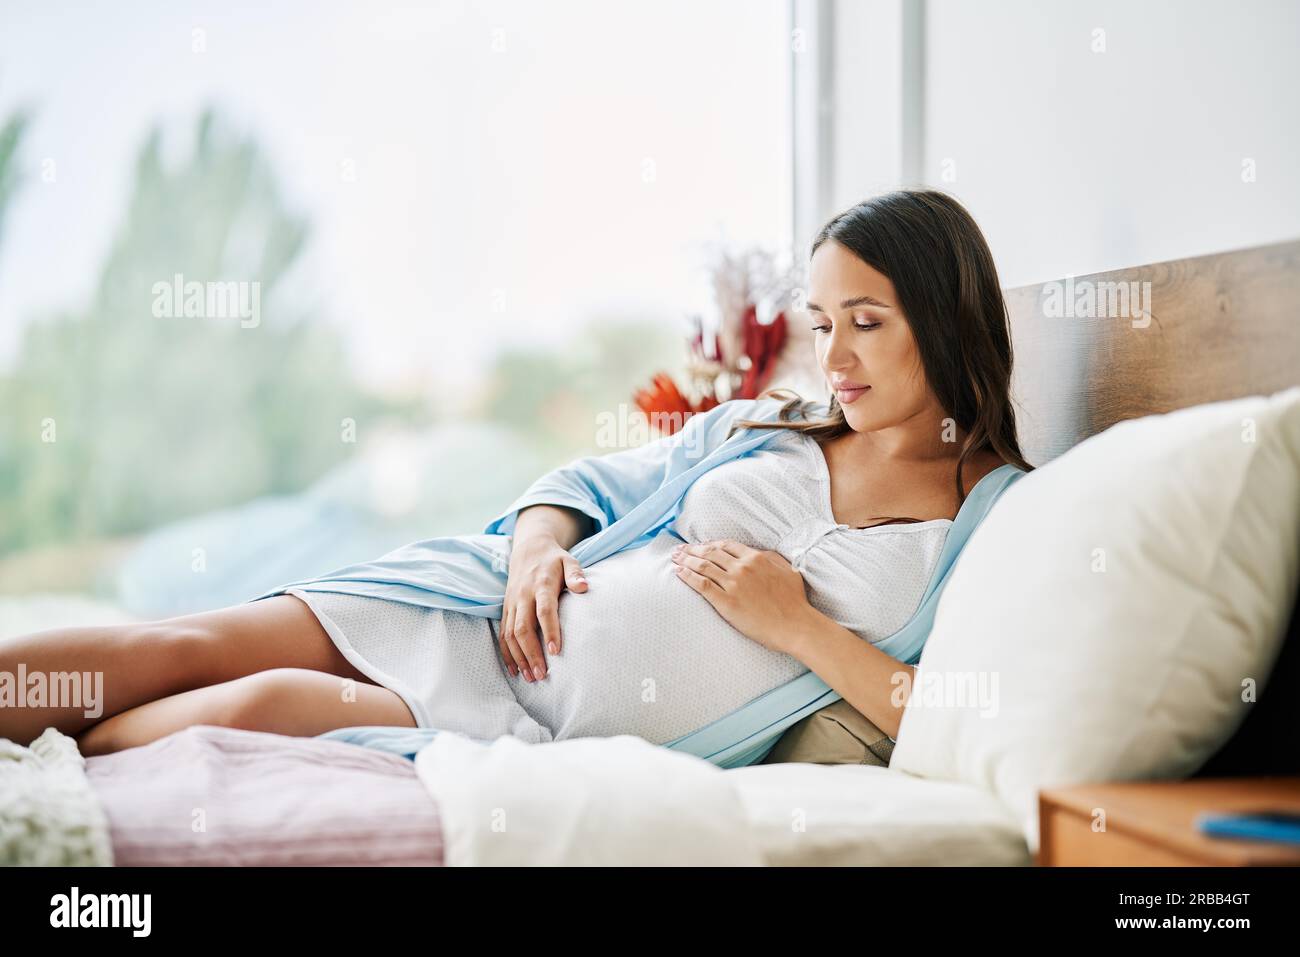 Portrait of happy pregnant woman relax lying in bed and touching her belly at home. Motherhood, people concept. Tender mood photo of pregnancy Stock Photo